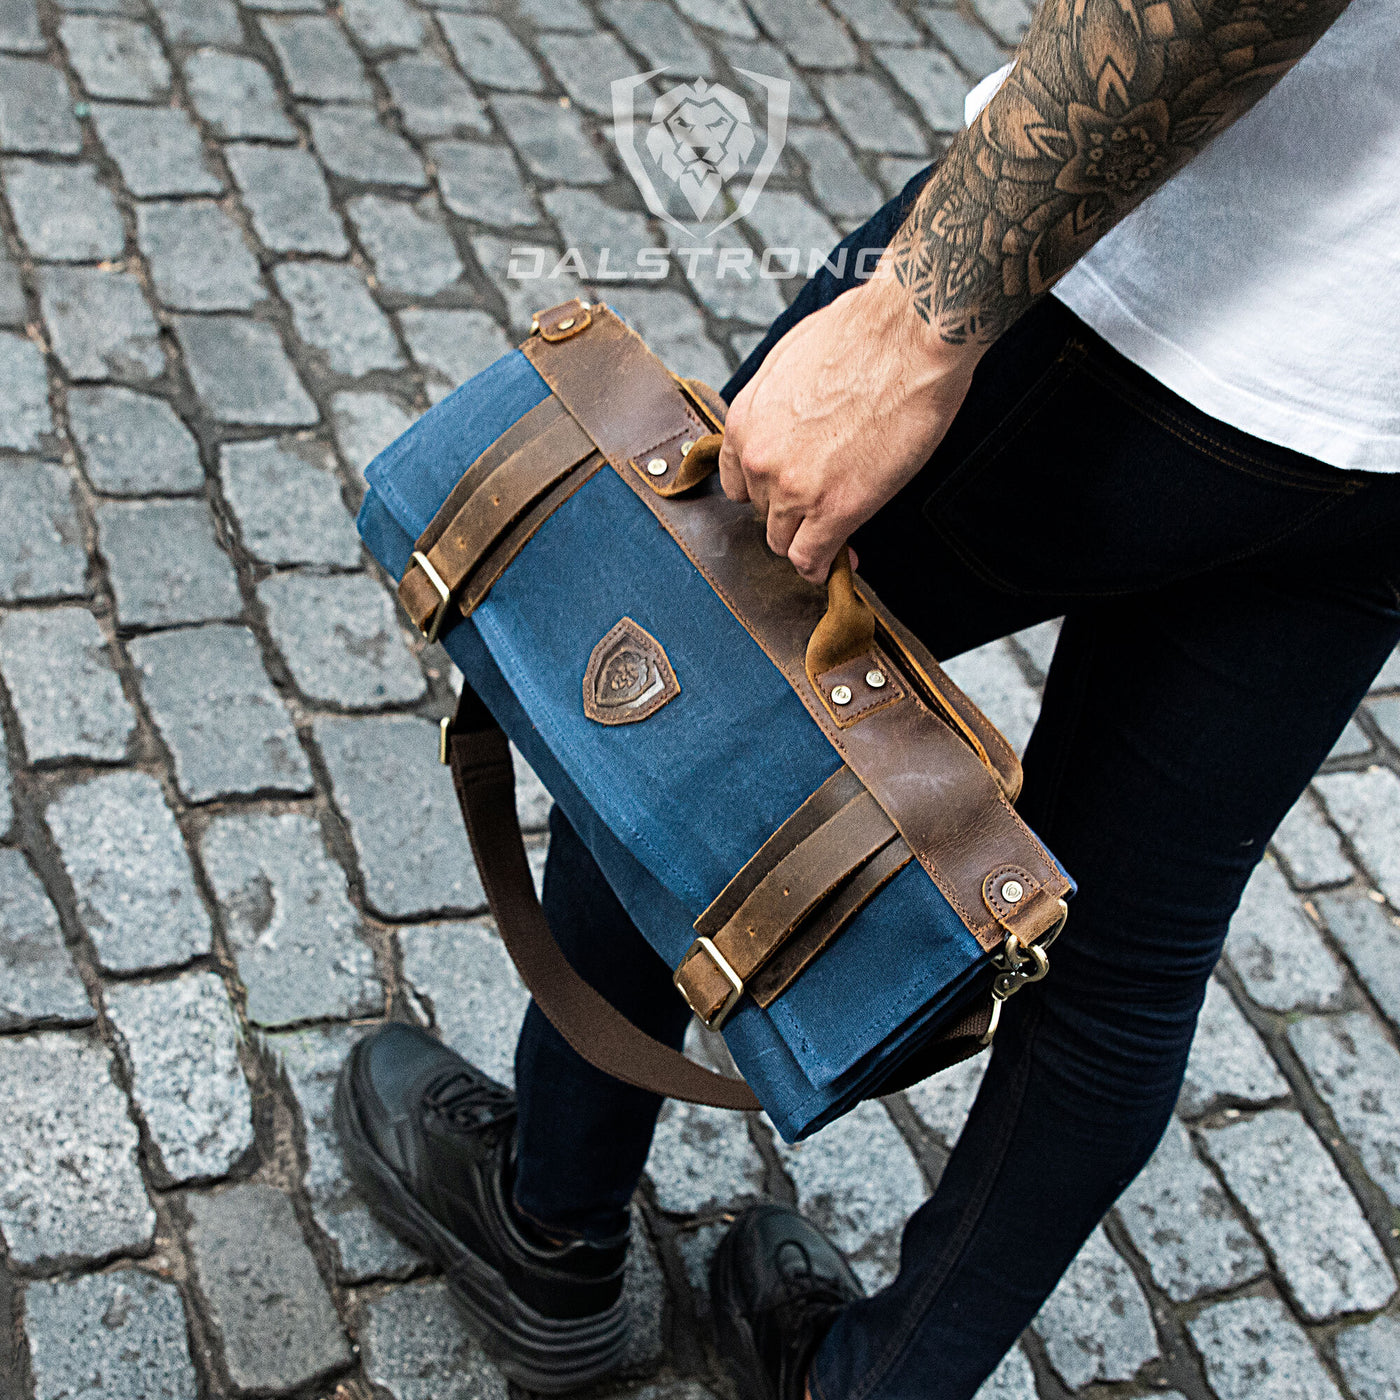 12oz Heavy Duty Canvas & Leather | Blue | Nomad Knife Roll | Dalstrong ©